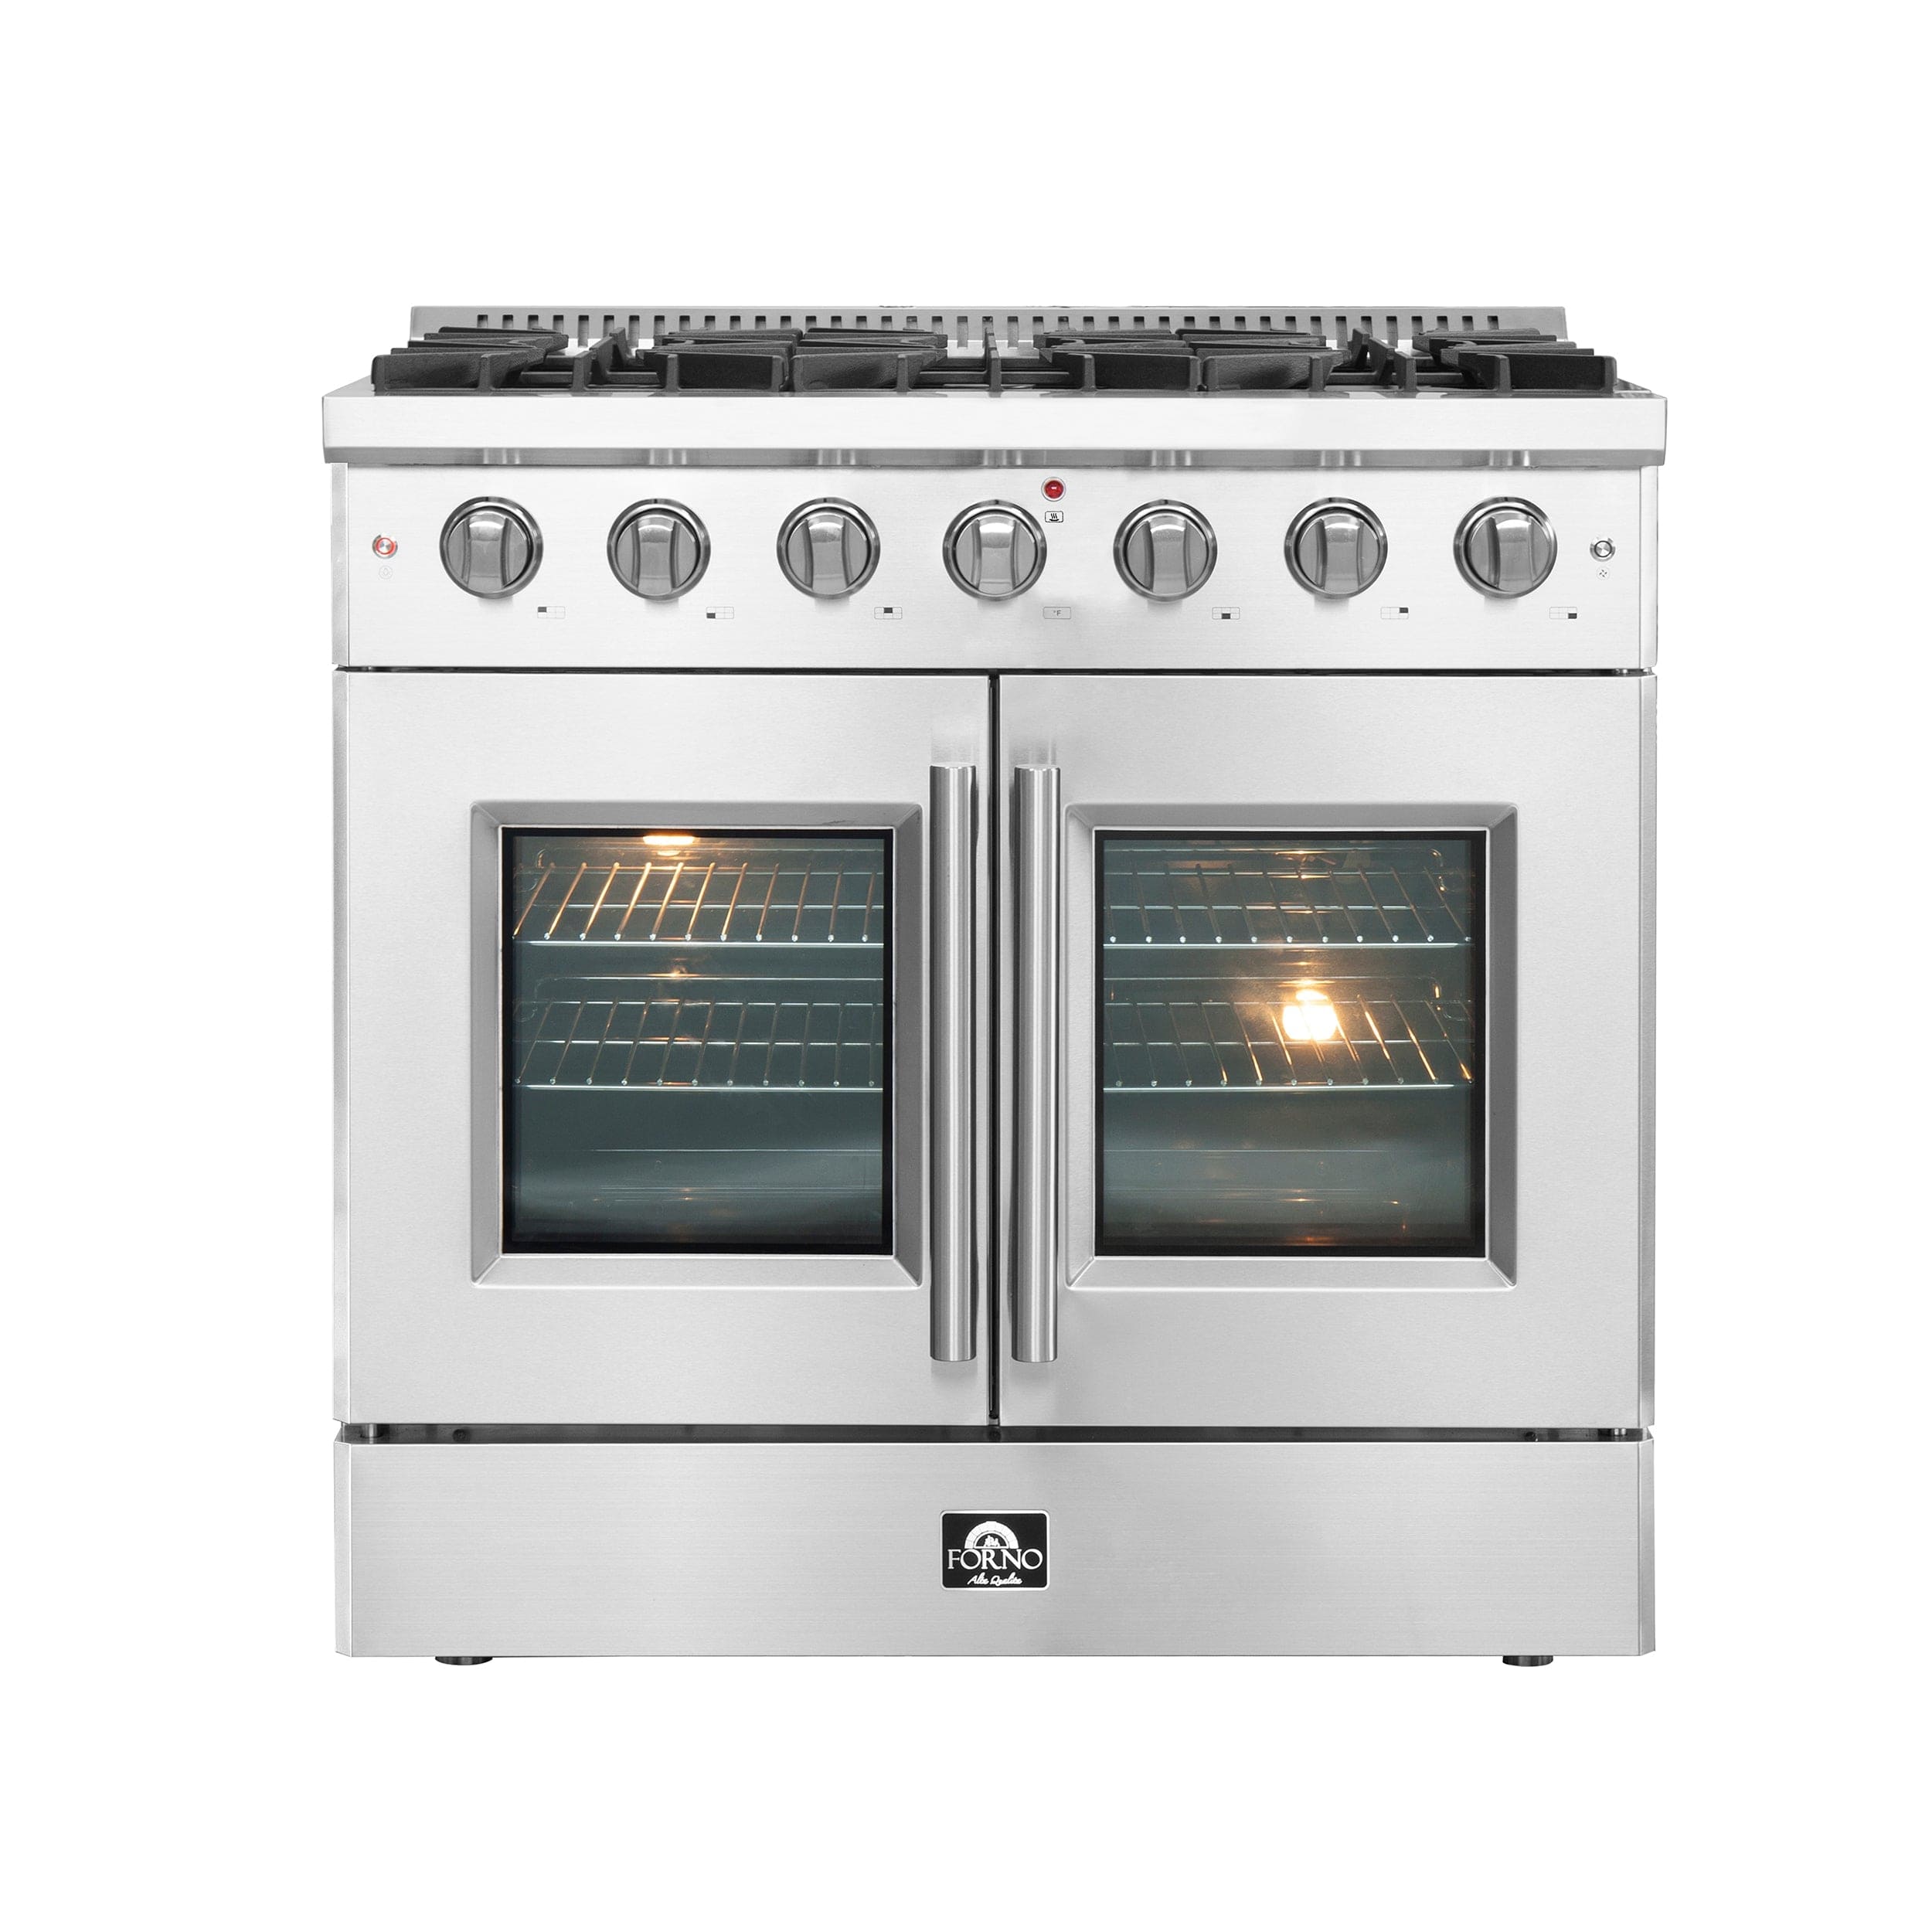 Forno Galiano 36" Freestanding Gas Range with French Door in Stainless Steel, FFSGS6444-36 Ranges FFSGS6444-36 Luxury Appliances Direct